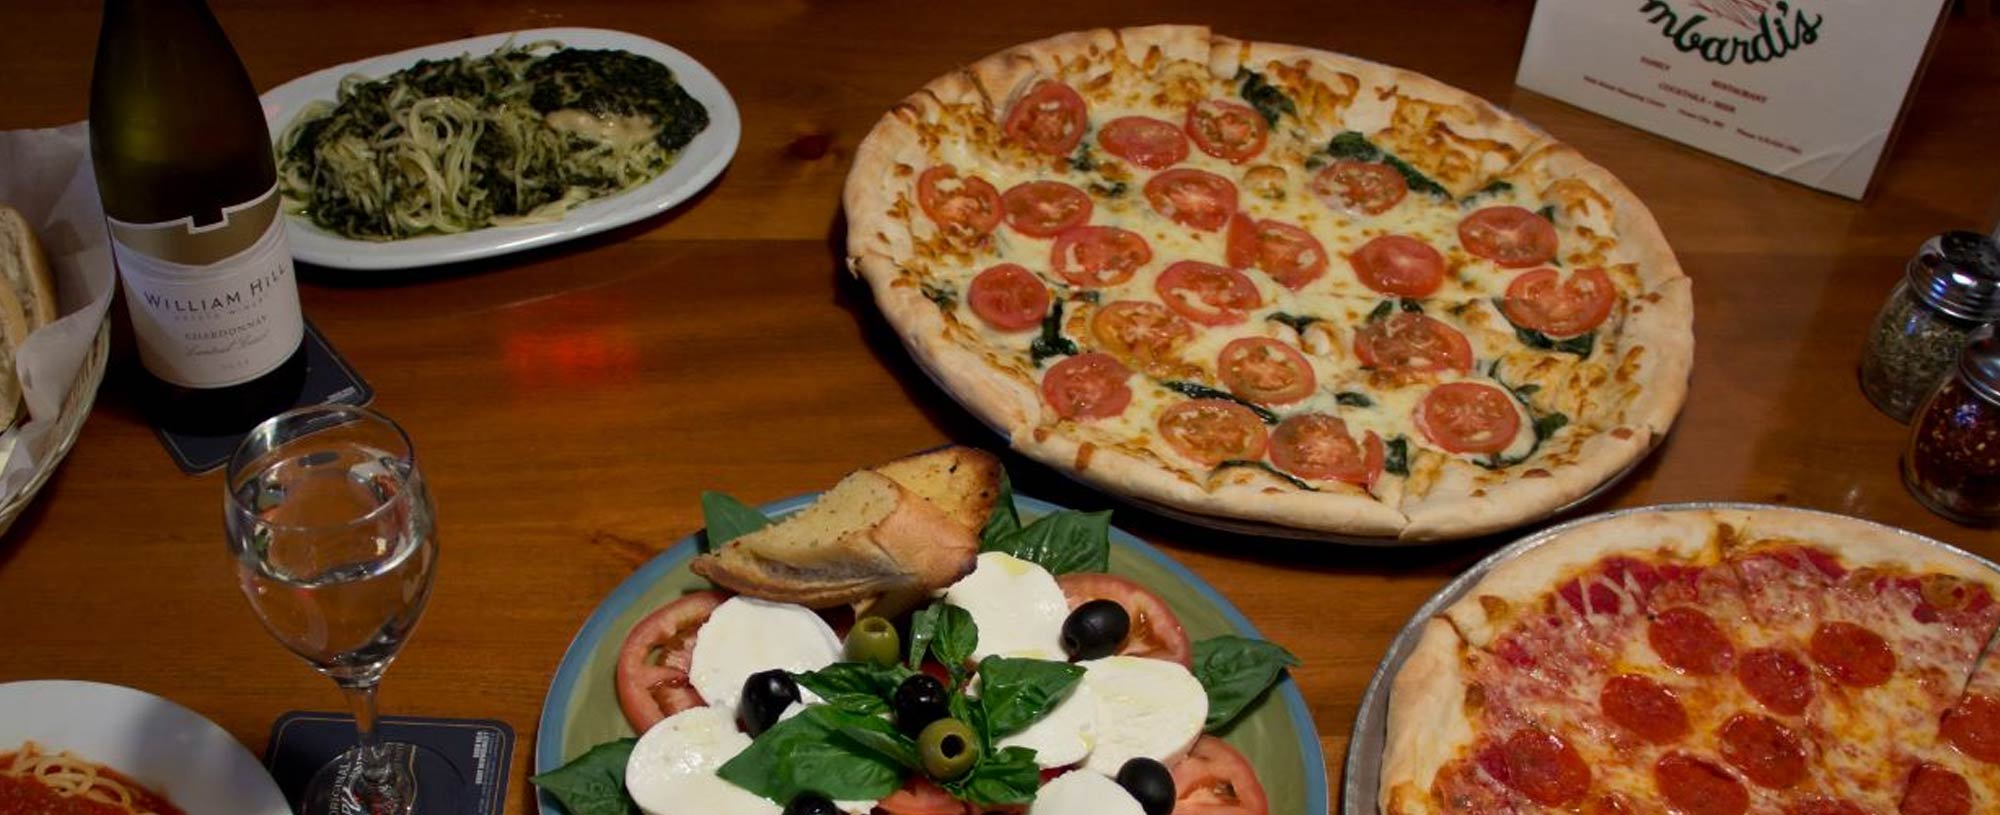 two pizzas, past and italian salad on table with wine at lombardi's pizza ocmd